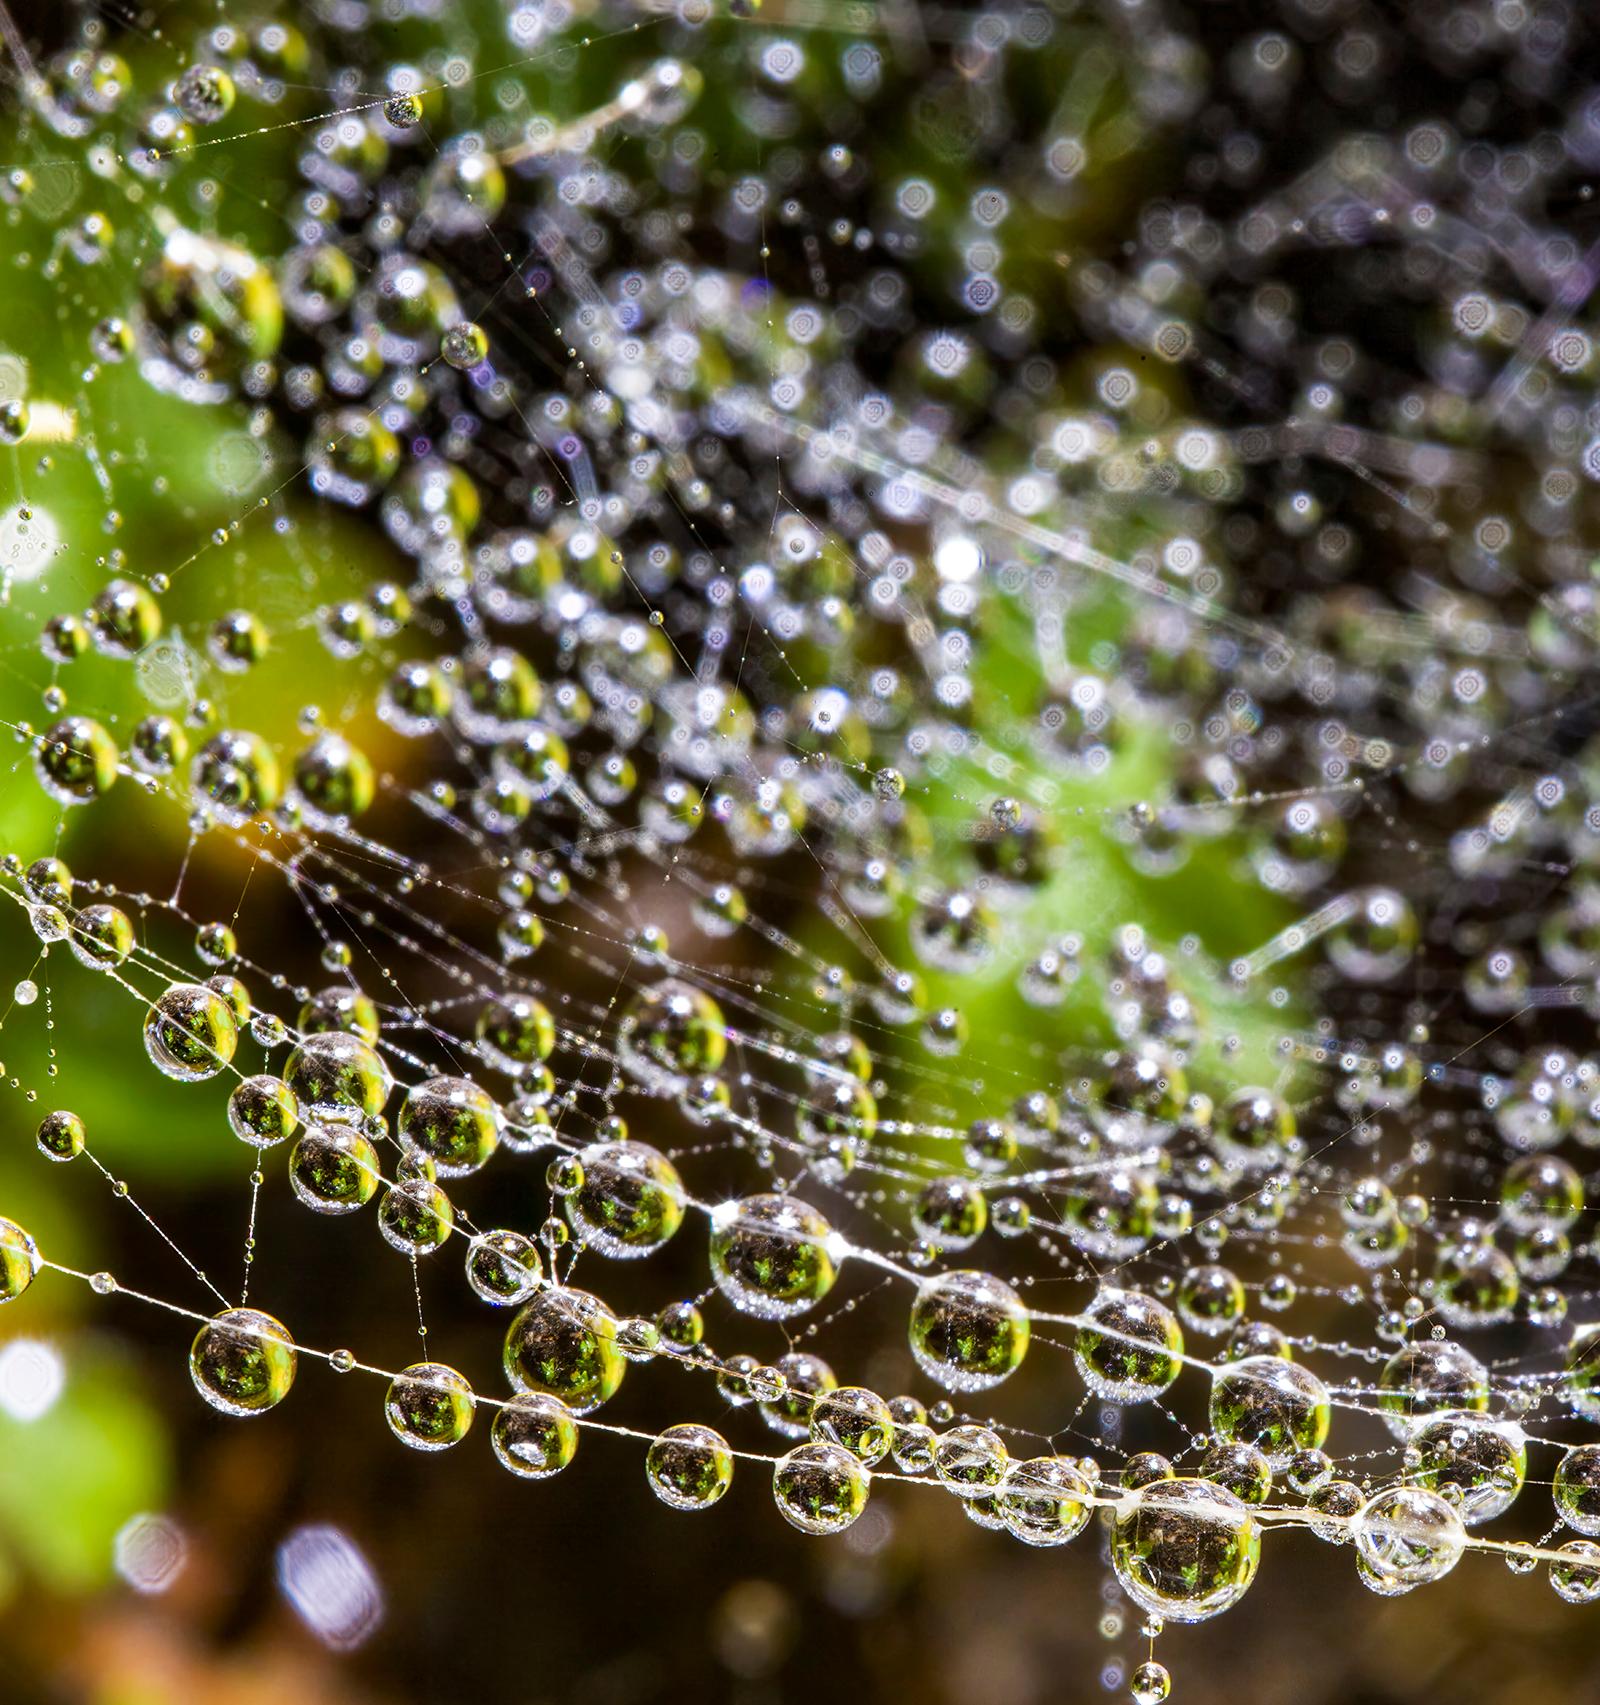 Droplets 1  - Limited edition pigment print  -   Limited Editions of 5
Close-up of dewdrops on a spider's web.

This is an Archival Pigment print on fiber based paper ( Hahnemühle Photo Rag® Baryta 315 gsm , Acid-free and lignin-free paper, Museum